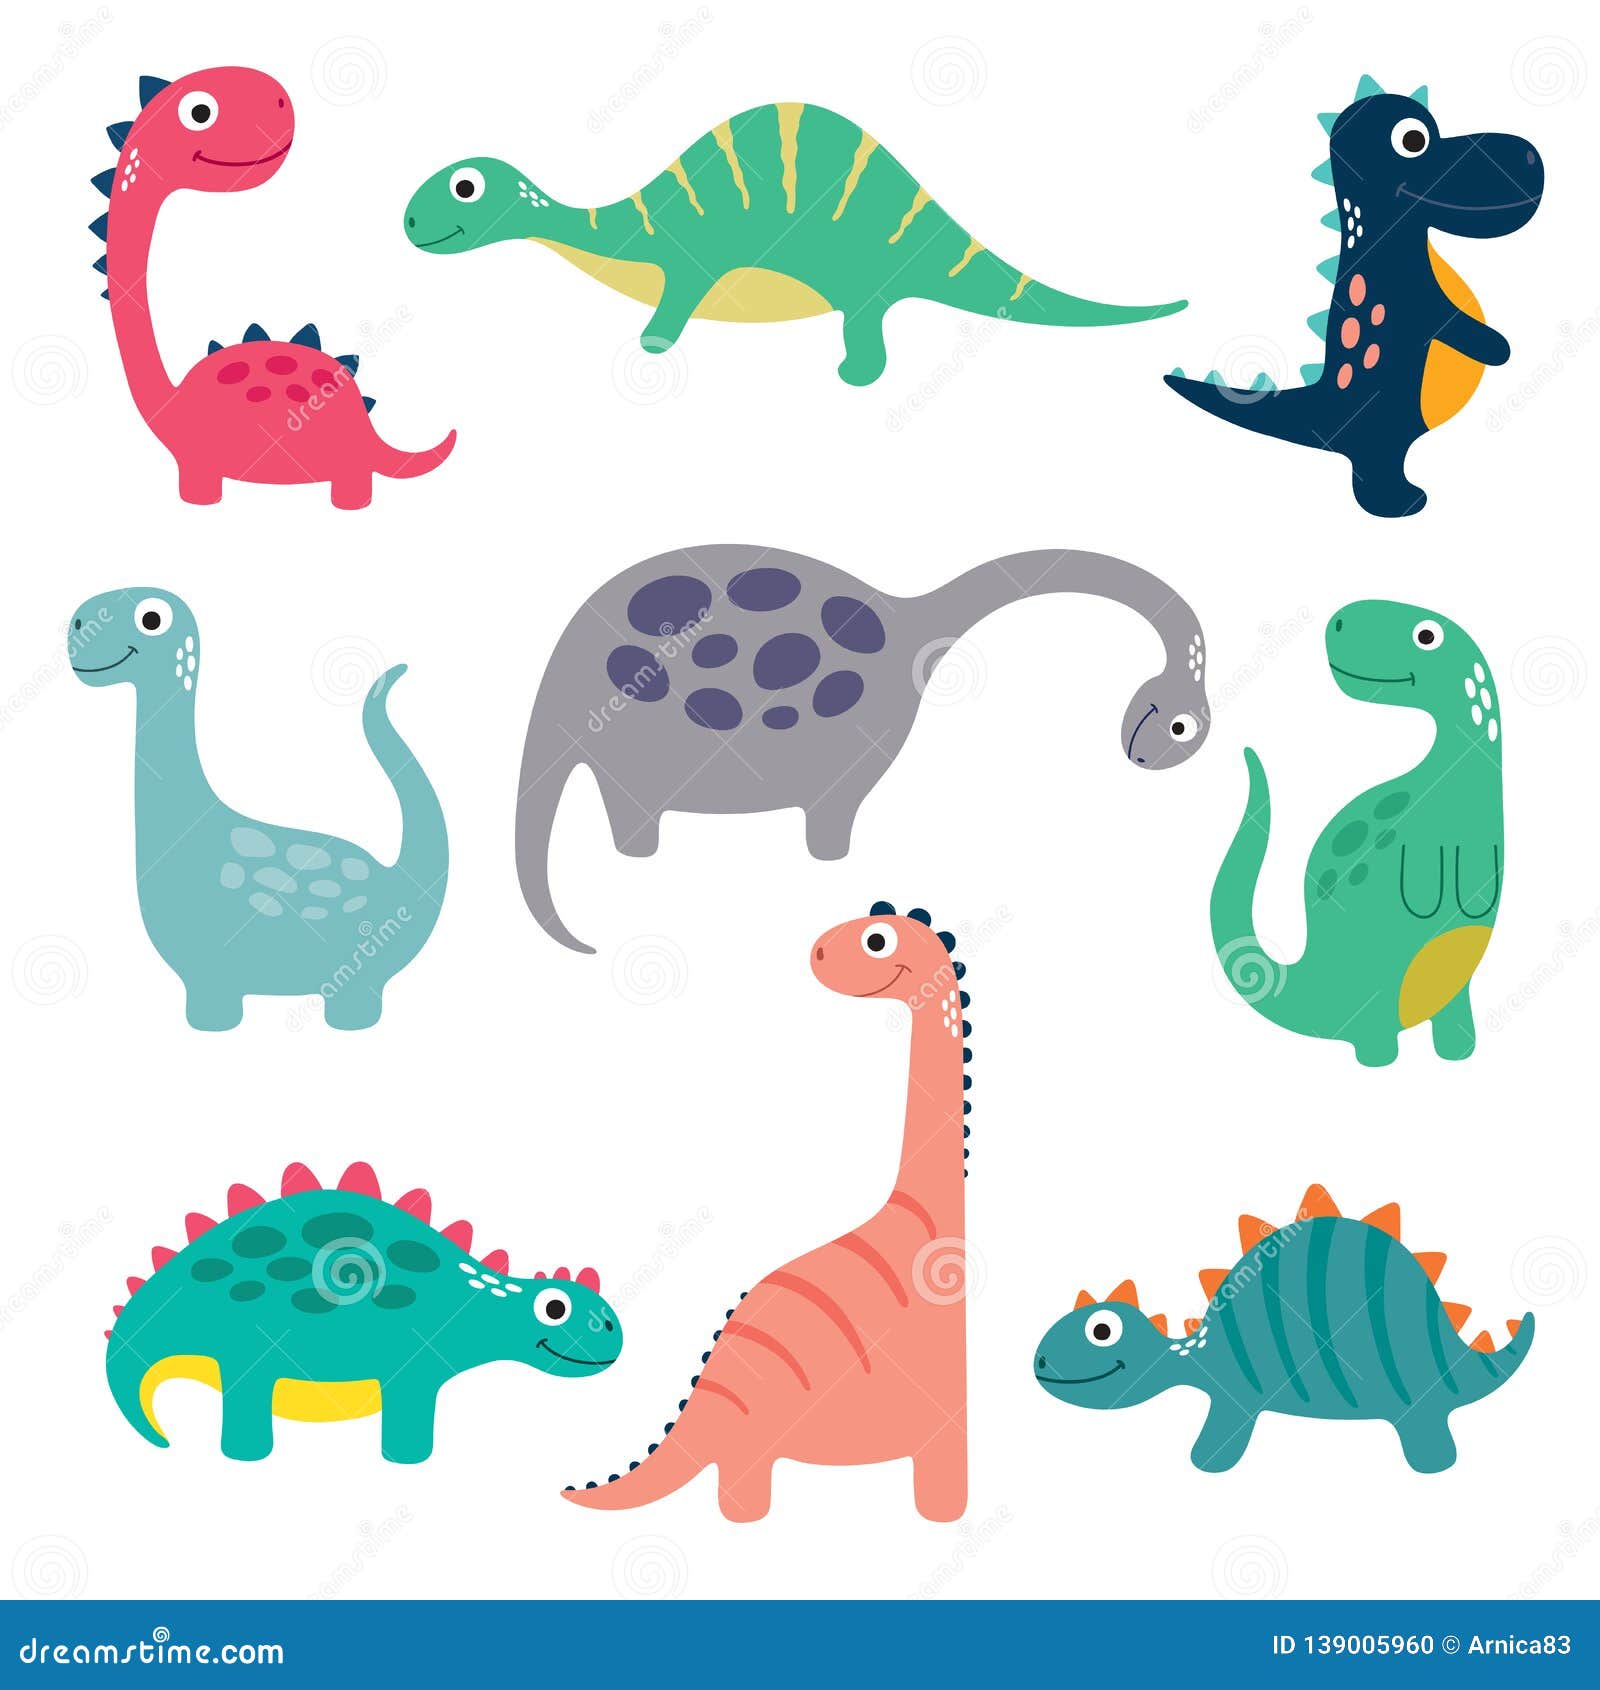 Funny Cartoon Dinosaurs Collection Stock Vector - Illustration of cute ...